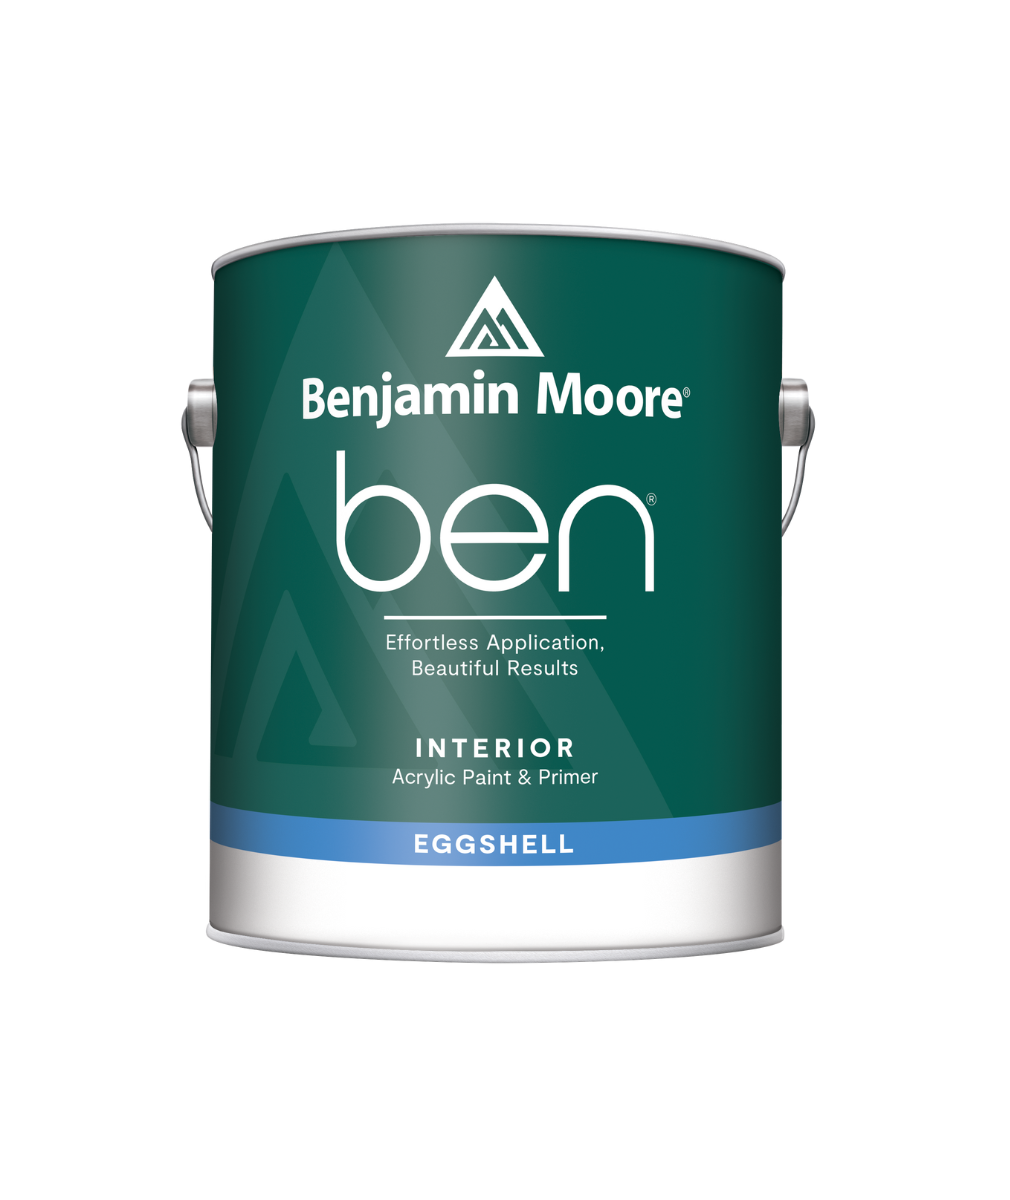 Benjamin Moore ben eggshell Interior Paint available at Regal Paint Centers.